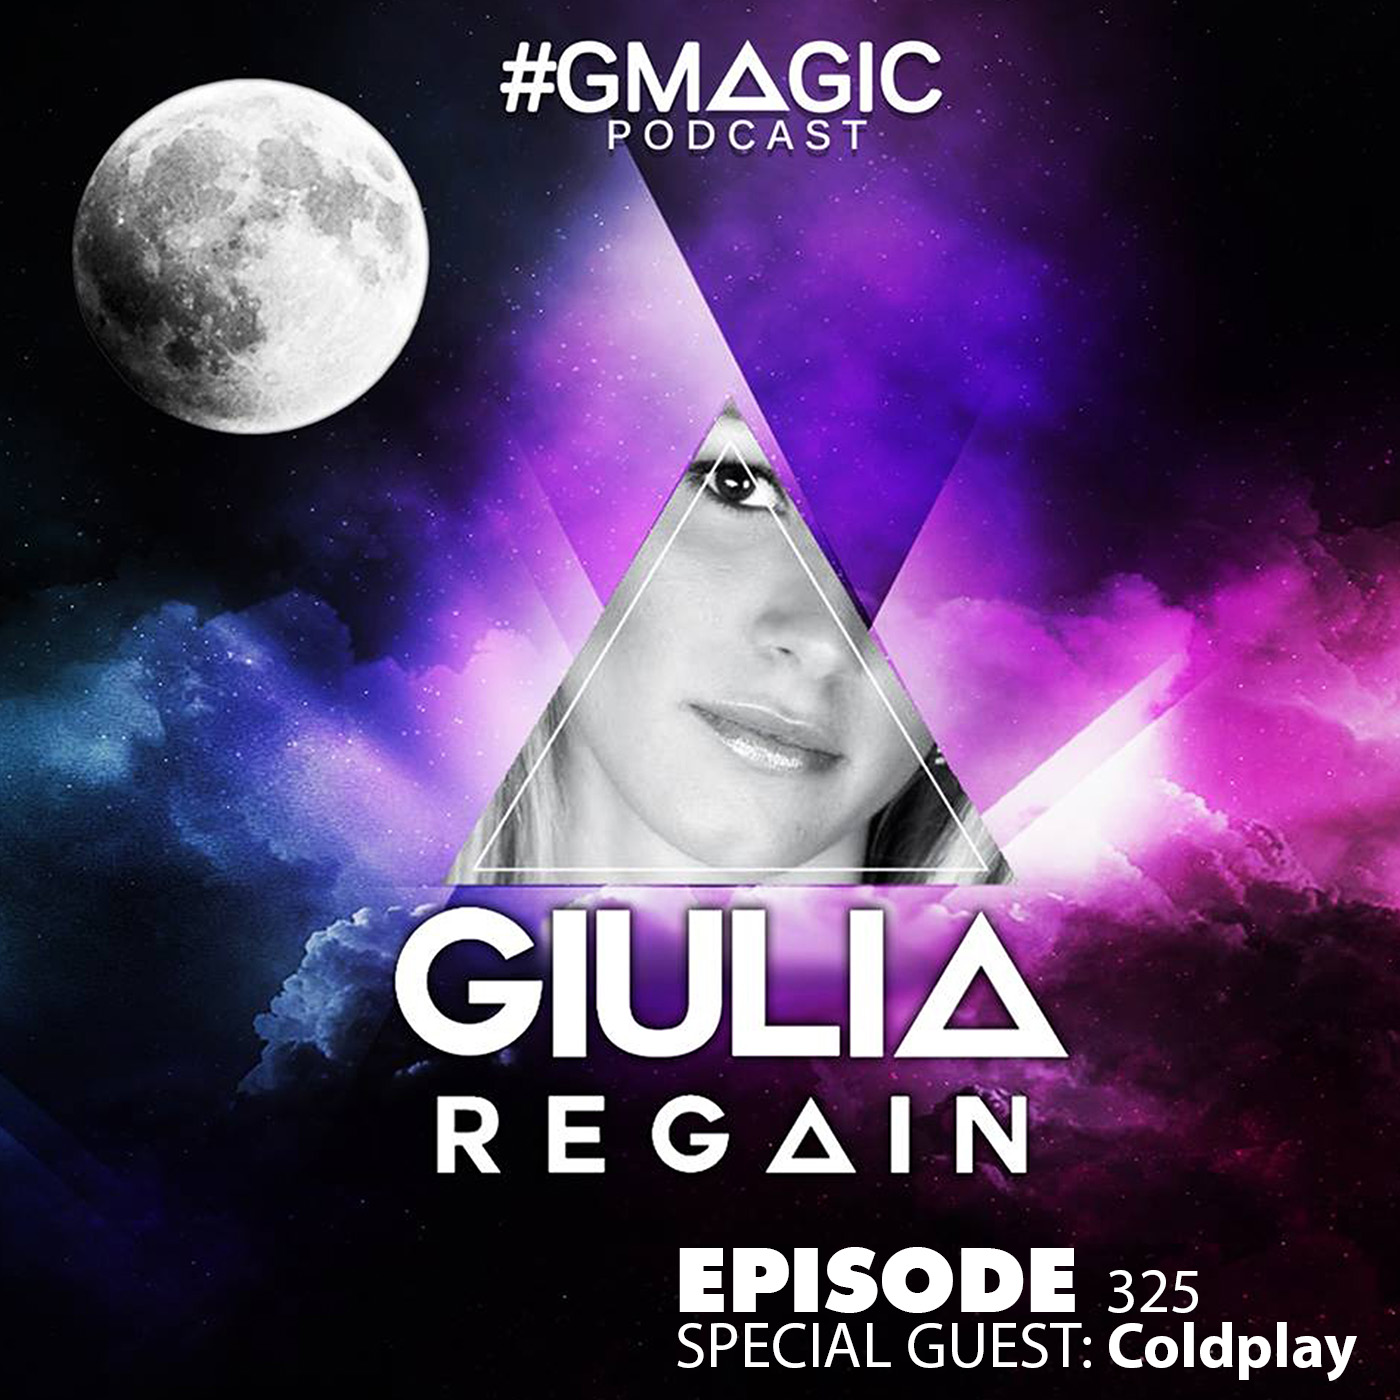 #Gmagic Podcast 325 - Special Guest: Coldplay